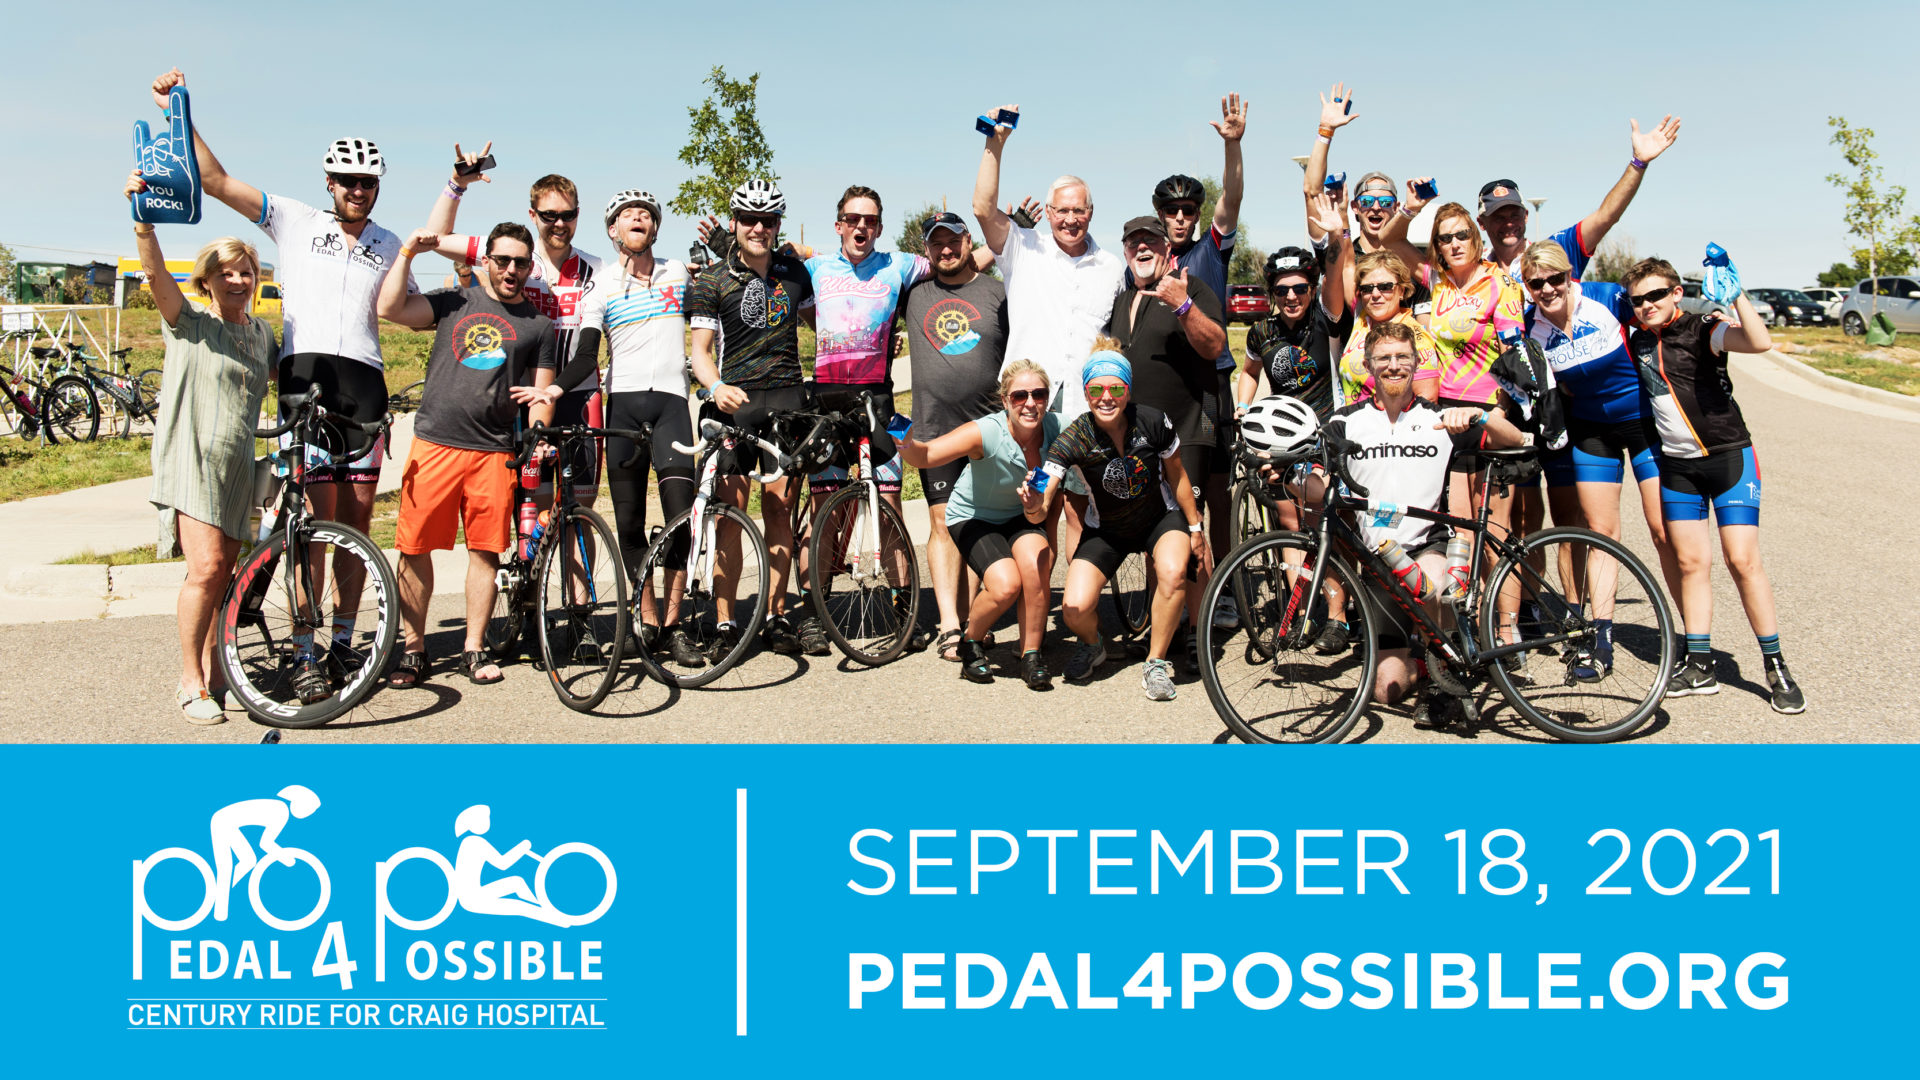 A graphic showing a group of people smiling and cheering with their bikes in front of them. There is a graphic banner in front that is blue, with the Pedal 4 Possible logo and text reading "September 18, 2021. Pedal4Possible.org.